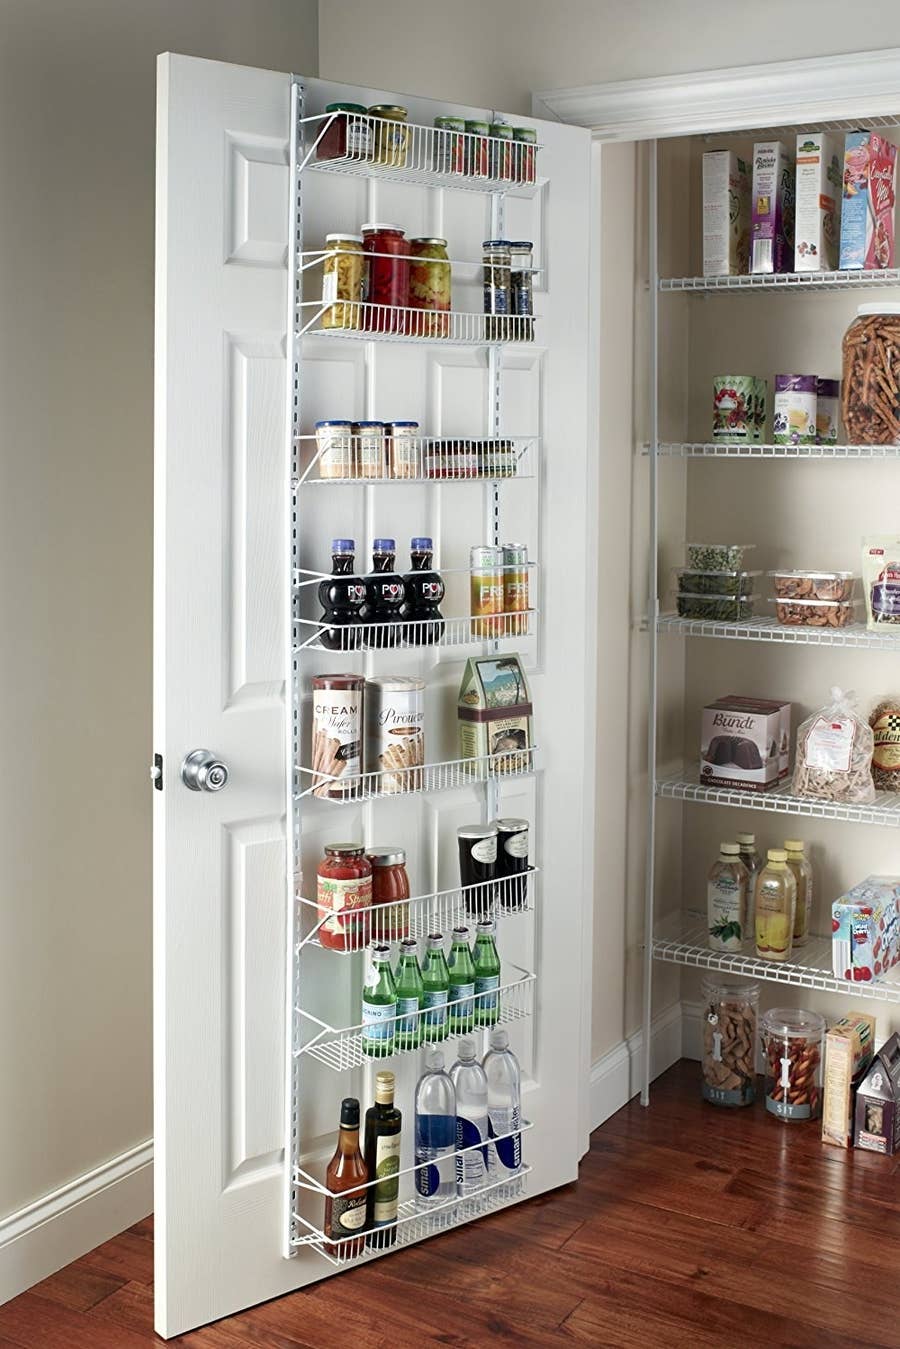 6 Things Nobody Ever Tells You About Organizing Your Pantry